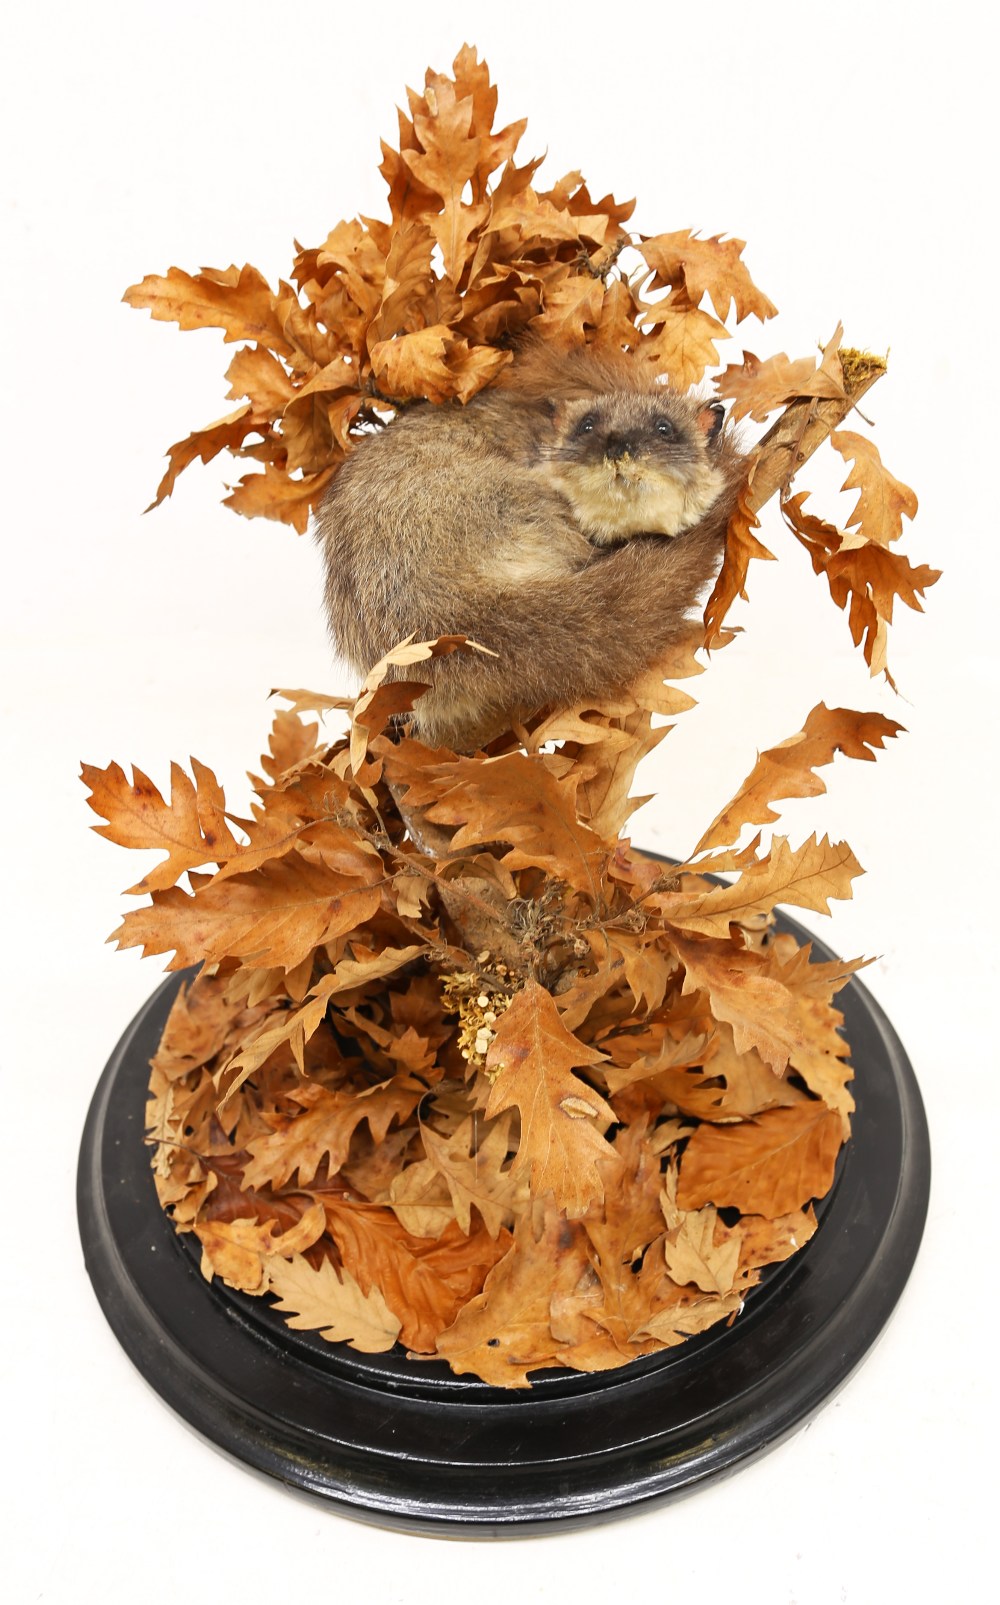 Taxidermy interest - Mid 20th Century edible dormouse curled up in oak leaves in glass dome case. - Image 2 of 3